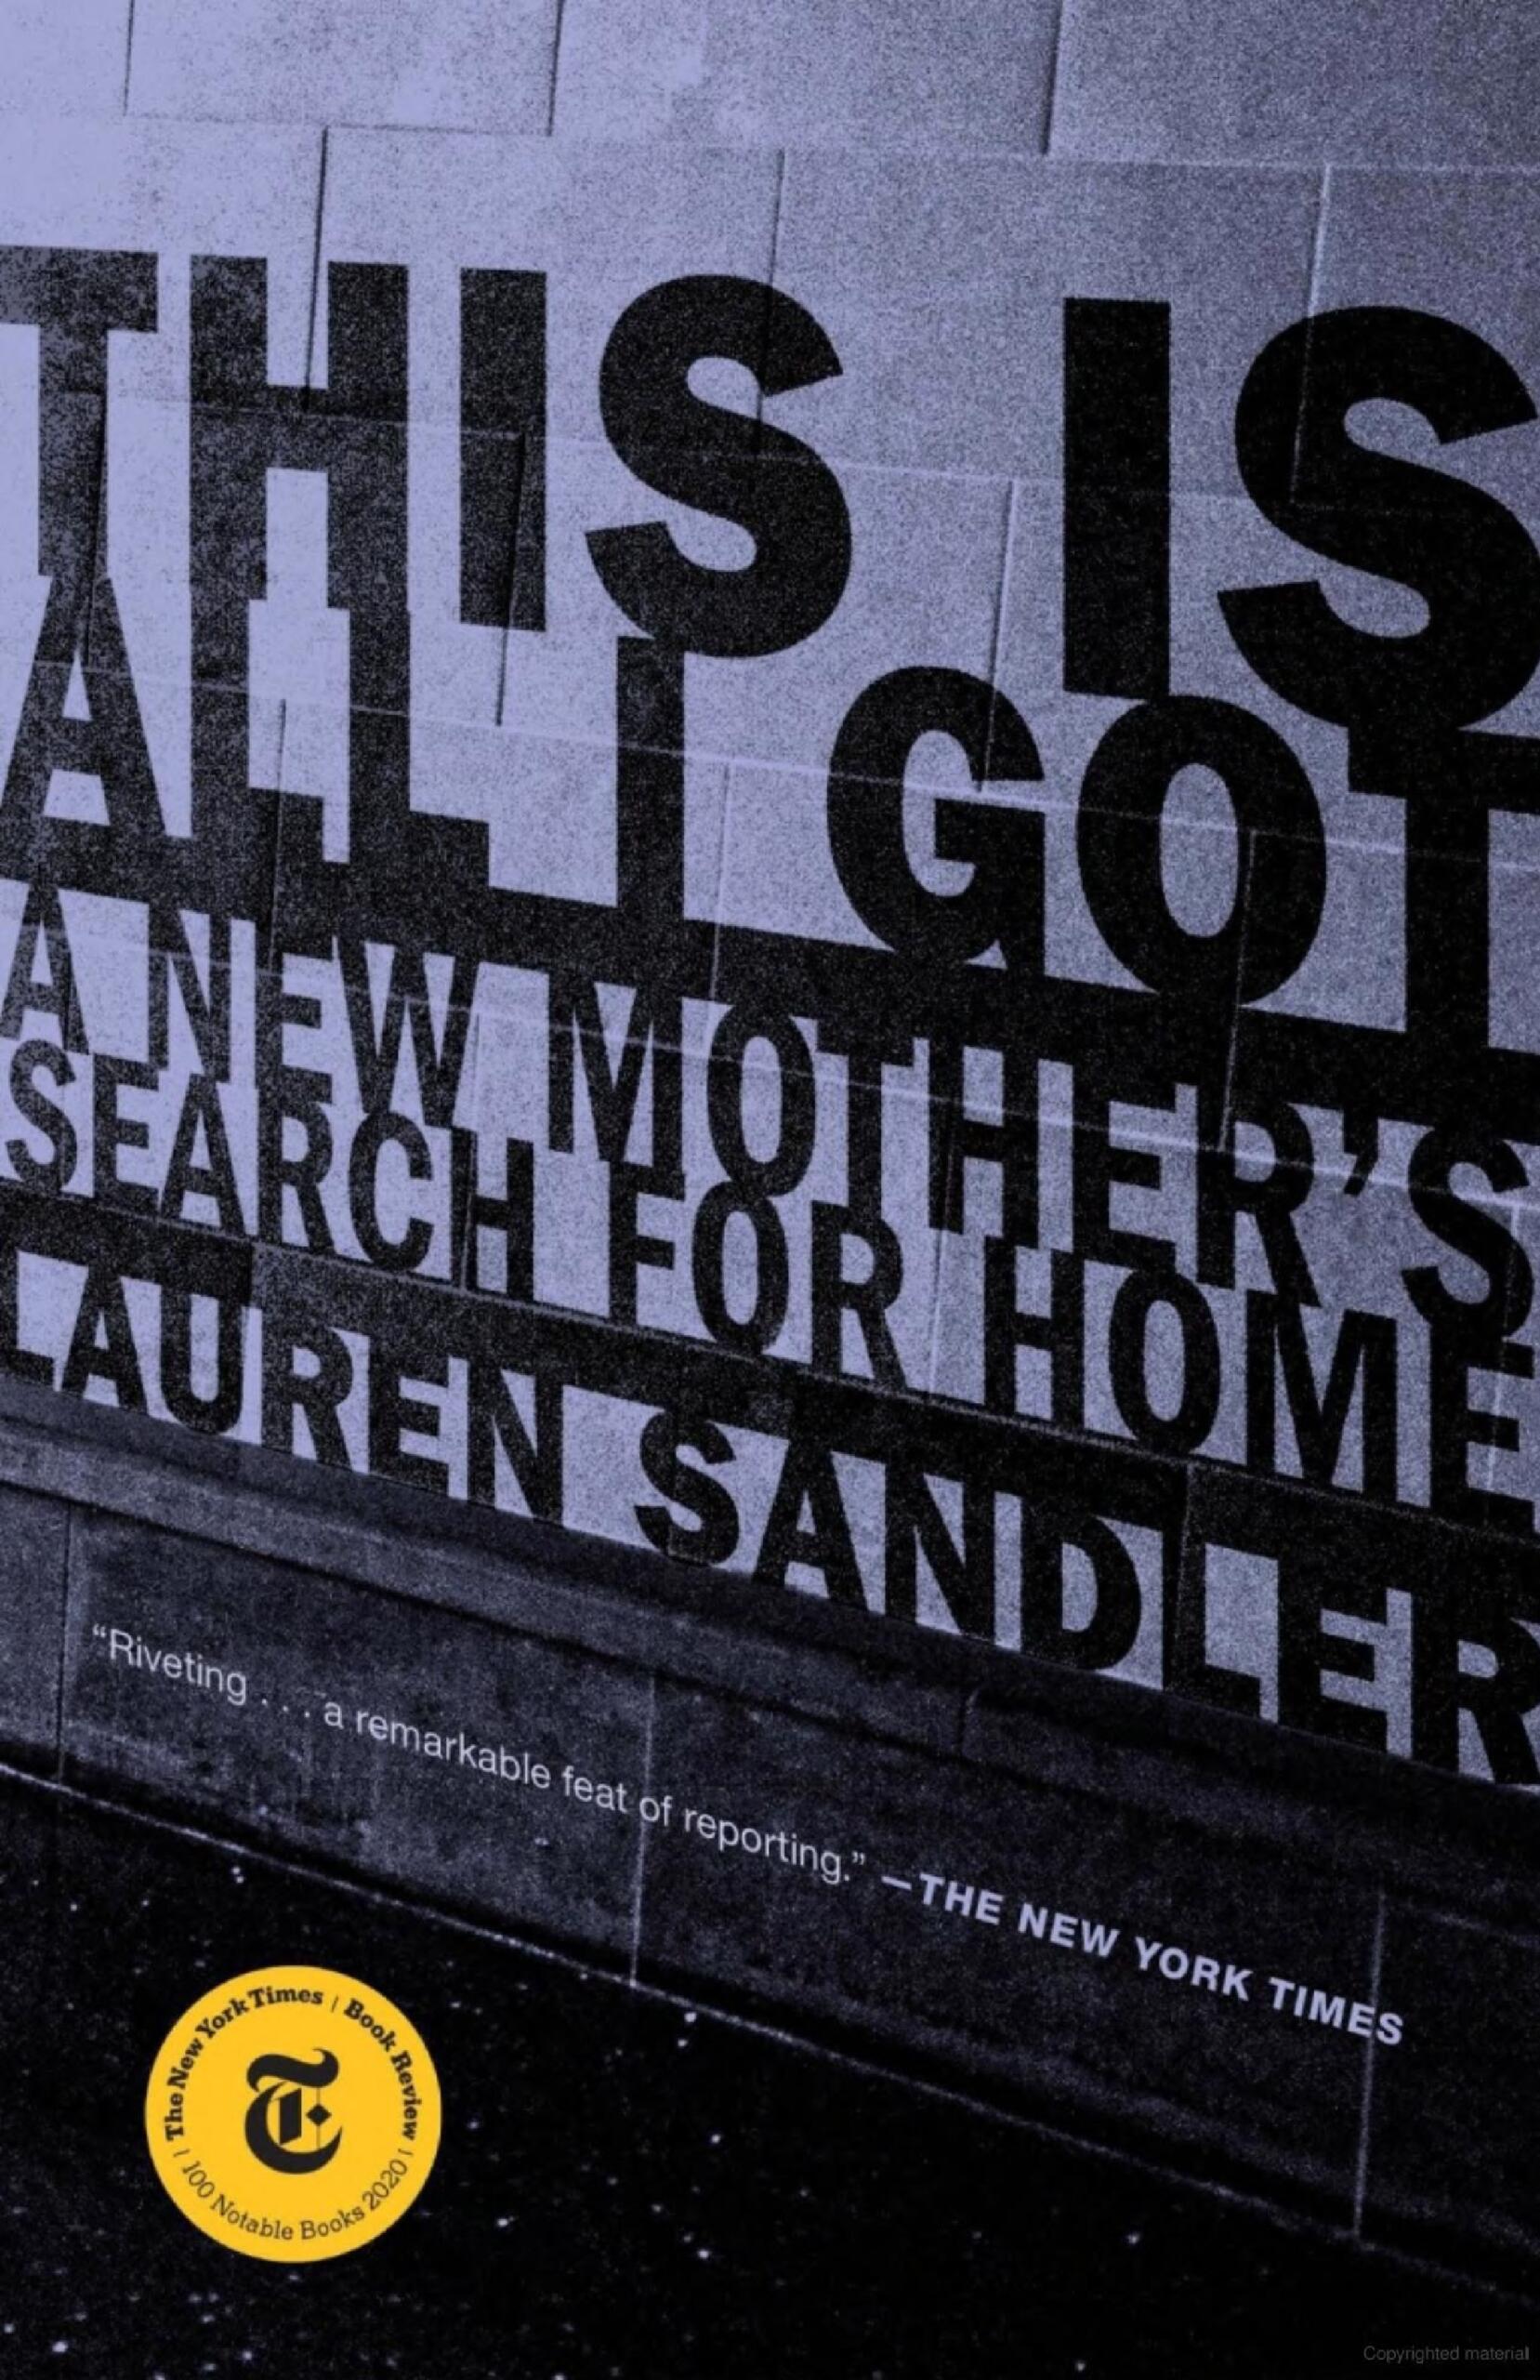 Cover of "This Is All I Got: A New Mother's Search for Home" by Lauren Sandler.